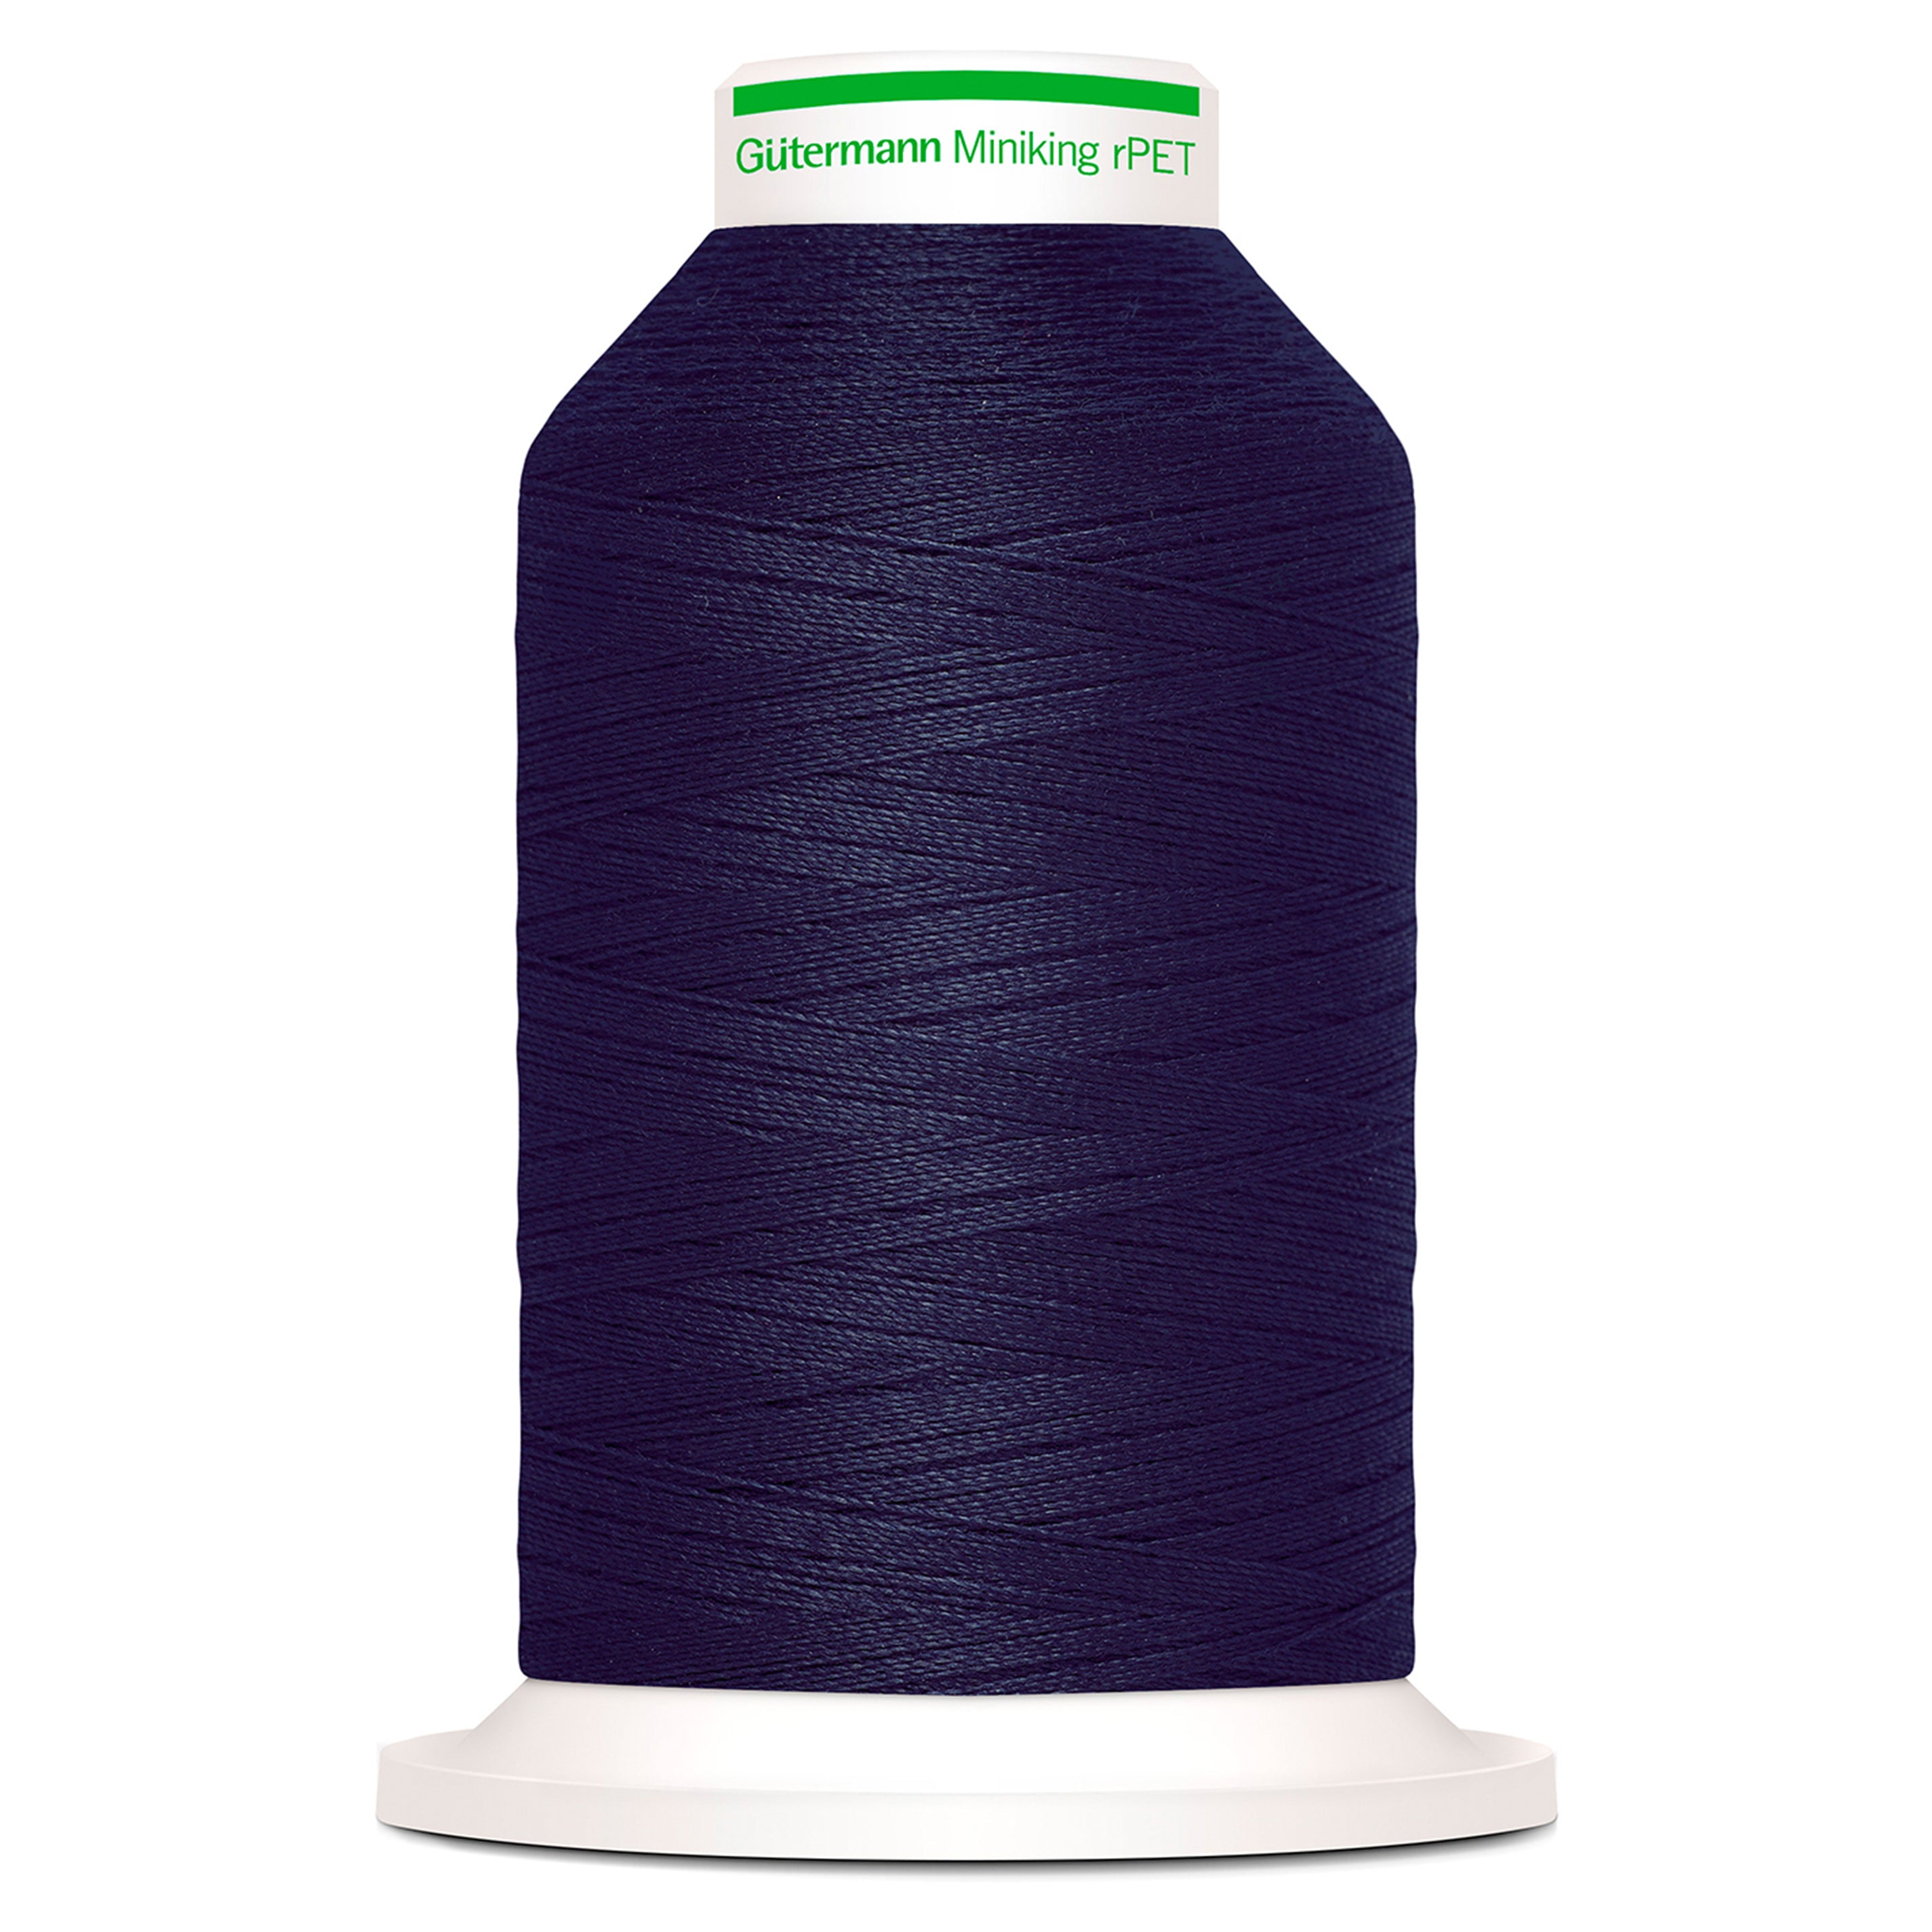 Gutermann rPET Miniking, 1000m recycled thread from Jaycotts Sewing Supplies